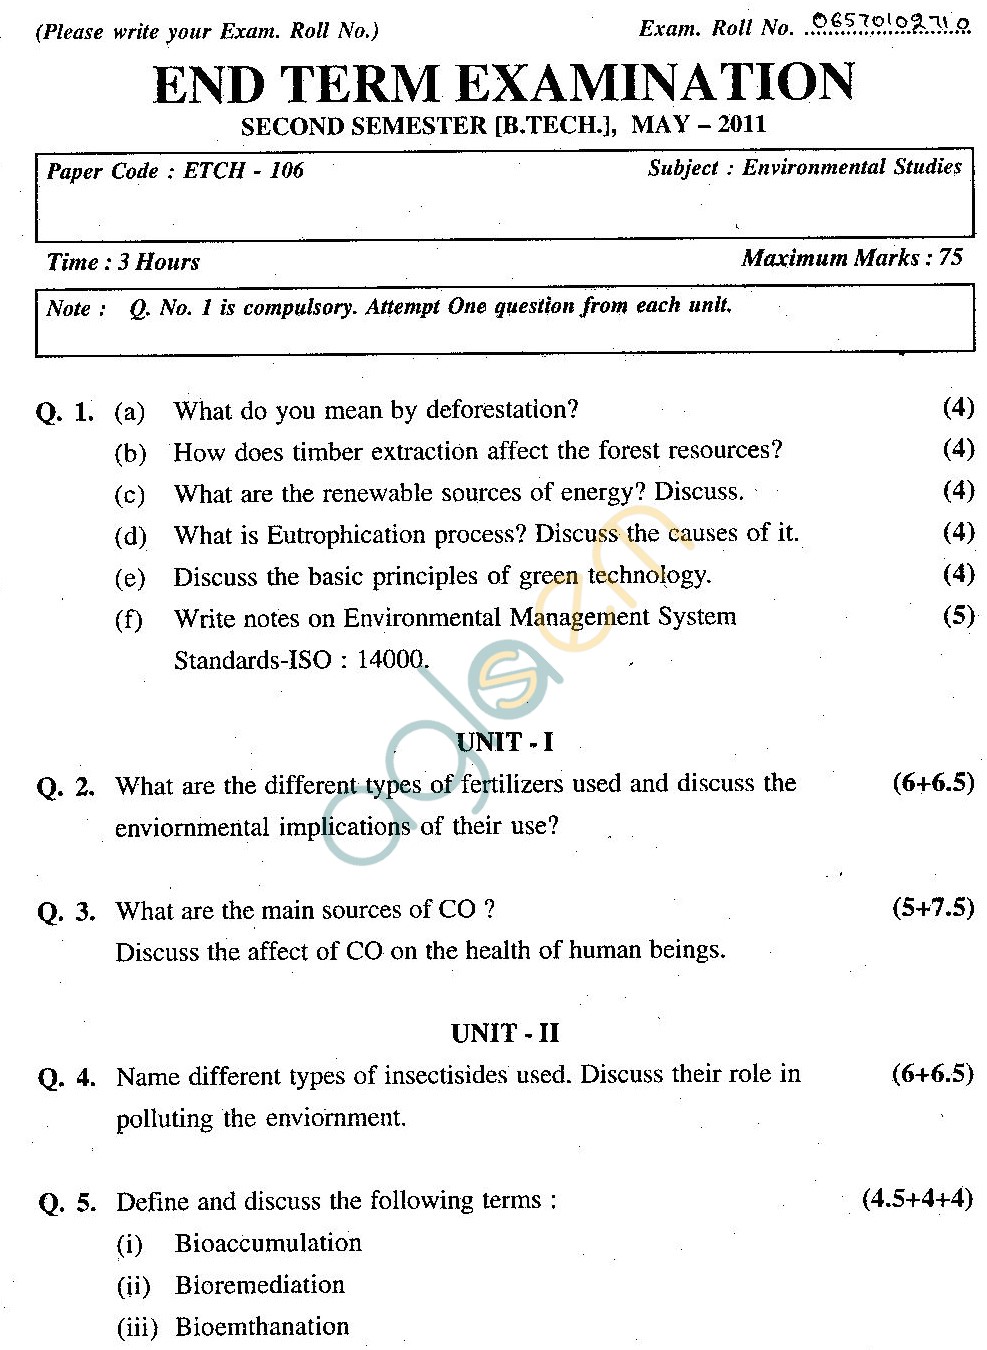 GGSIPU Question Papers Second Semester  end Term 2011  ETCH -106